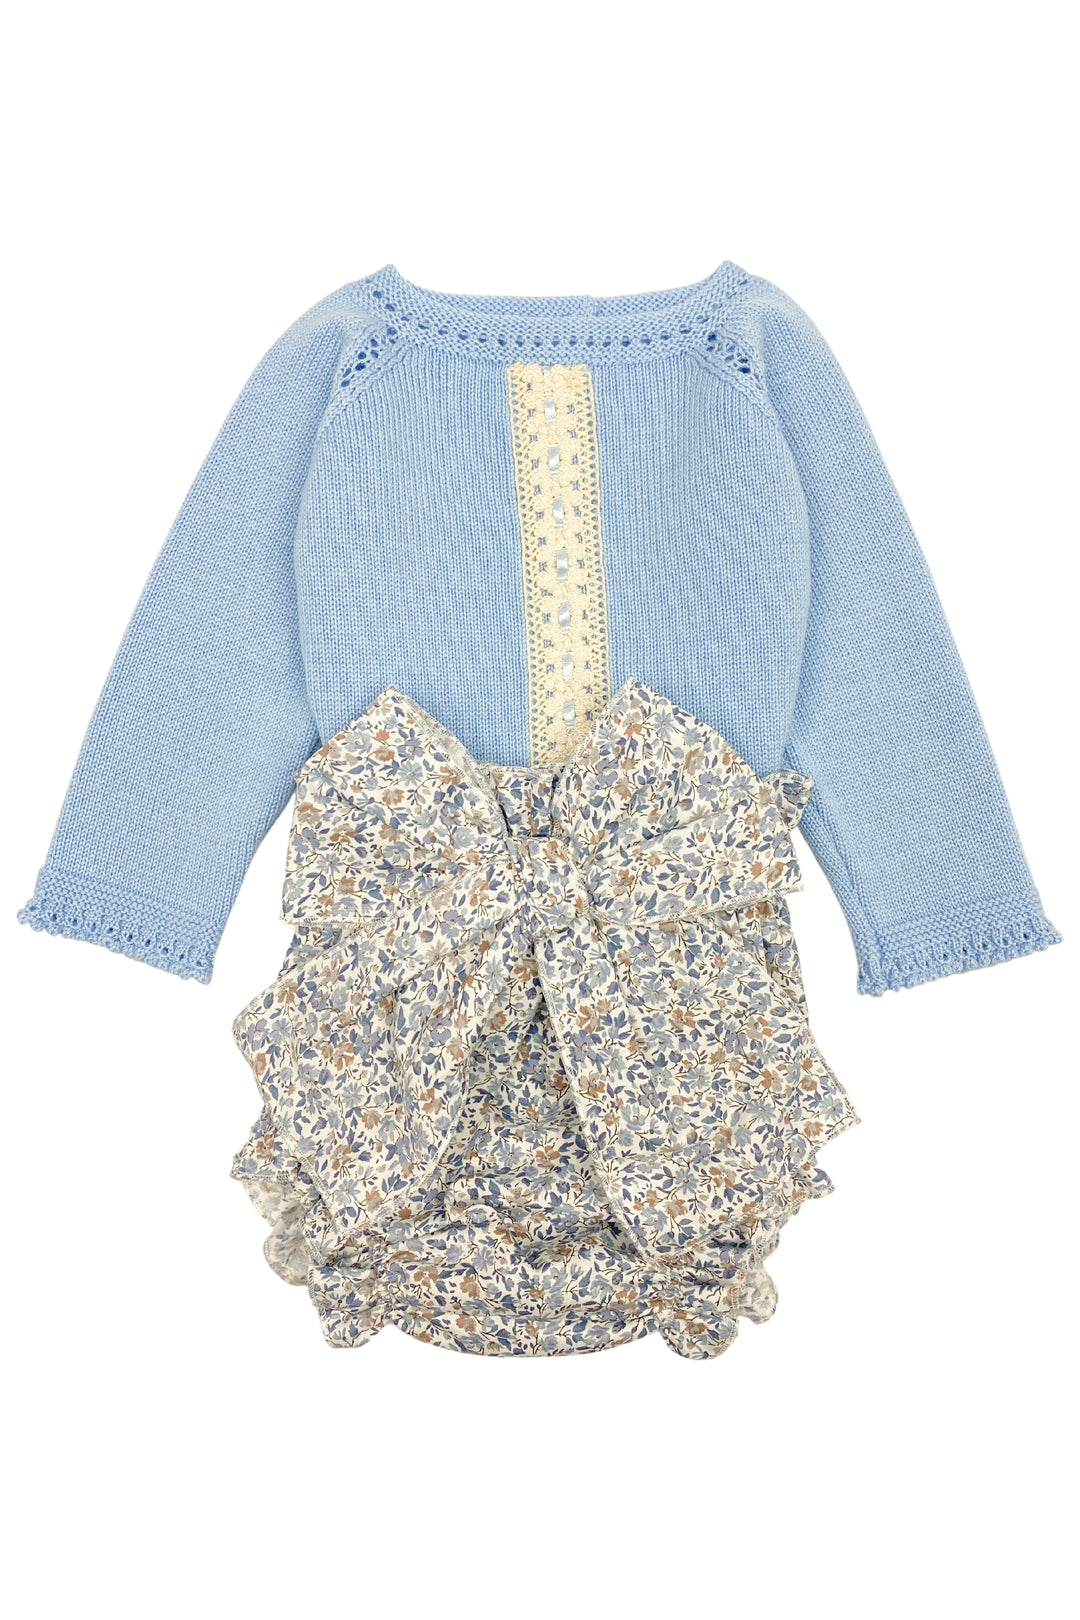 Granlei "Adelaide" Powder Blue Knit Top & Floral Bloomers | Millie and John